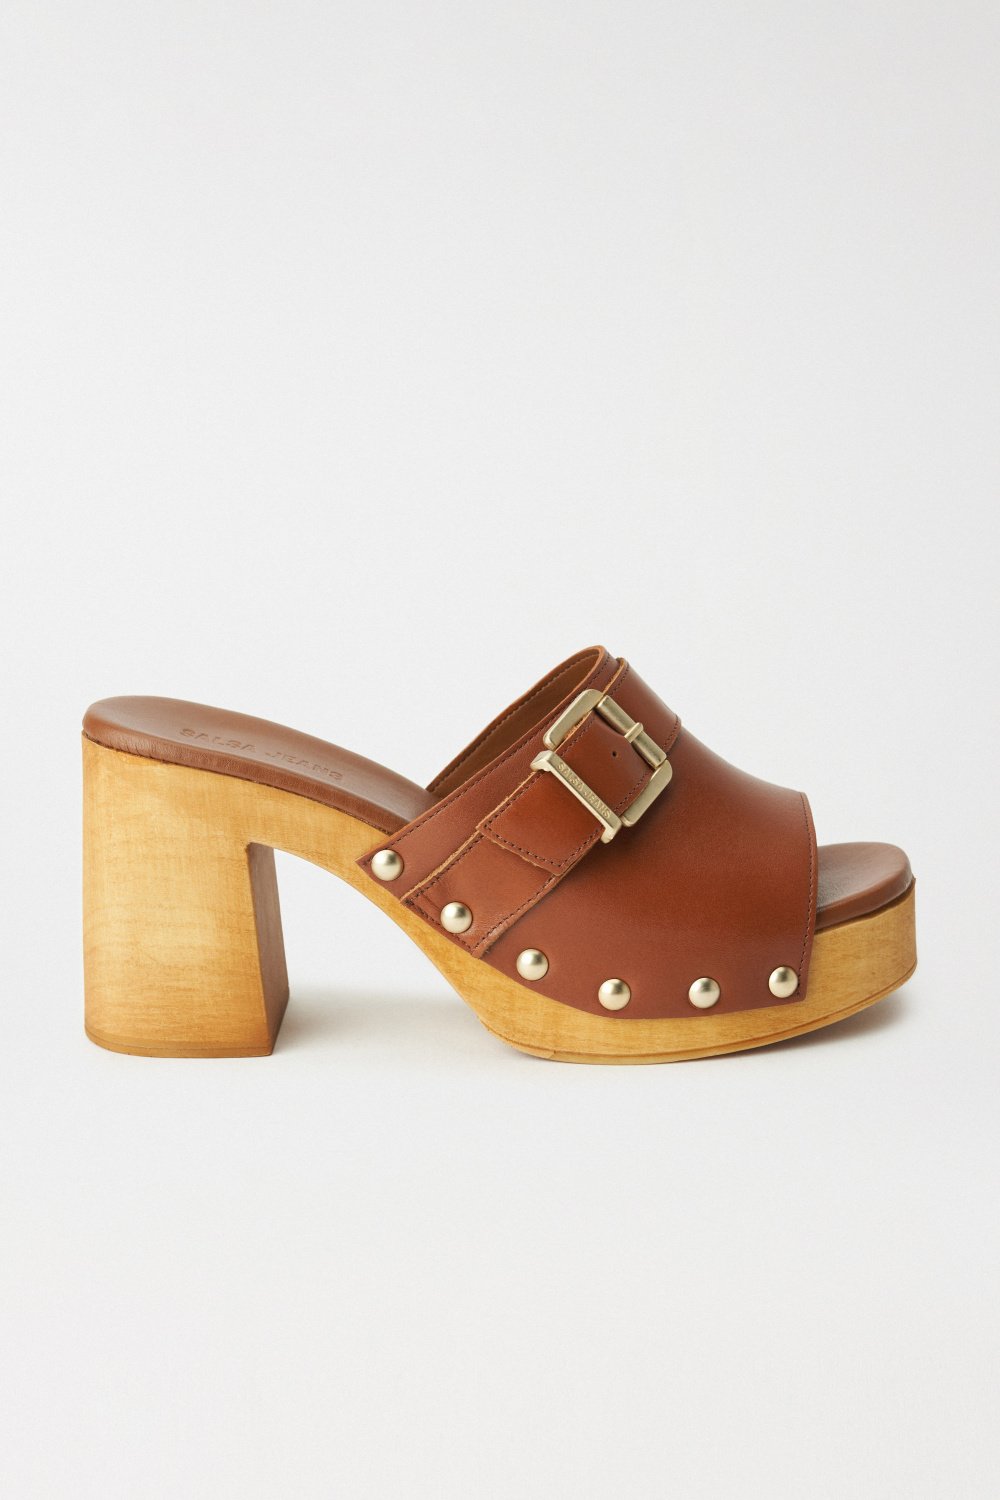 LEATHER CLOG SANDALS WITH BUCKLE AND GOLD APPLIQUS - Salsa